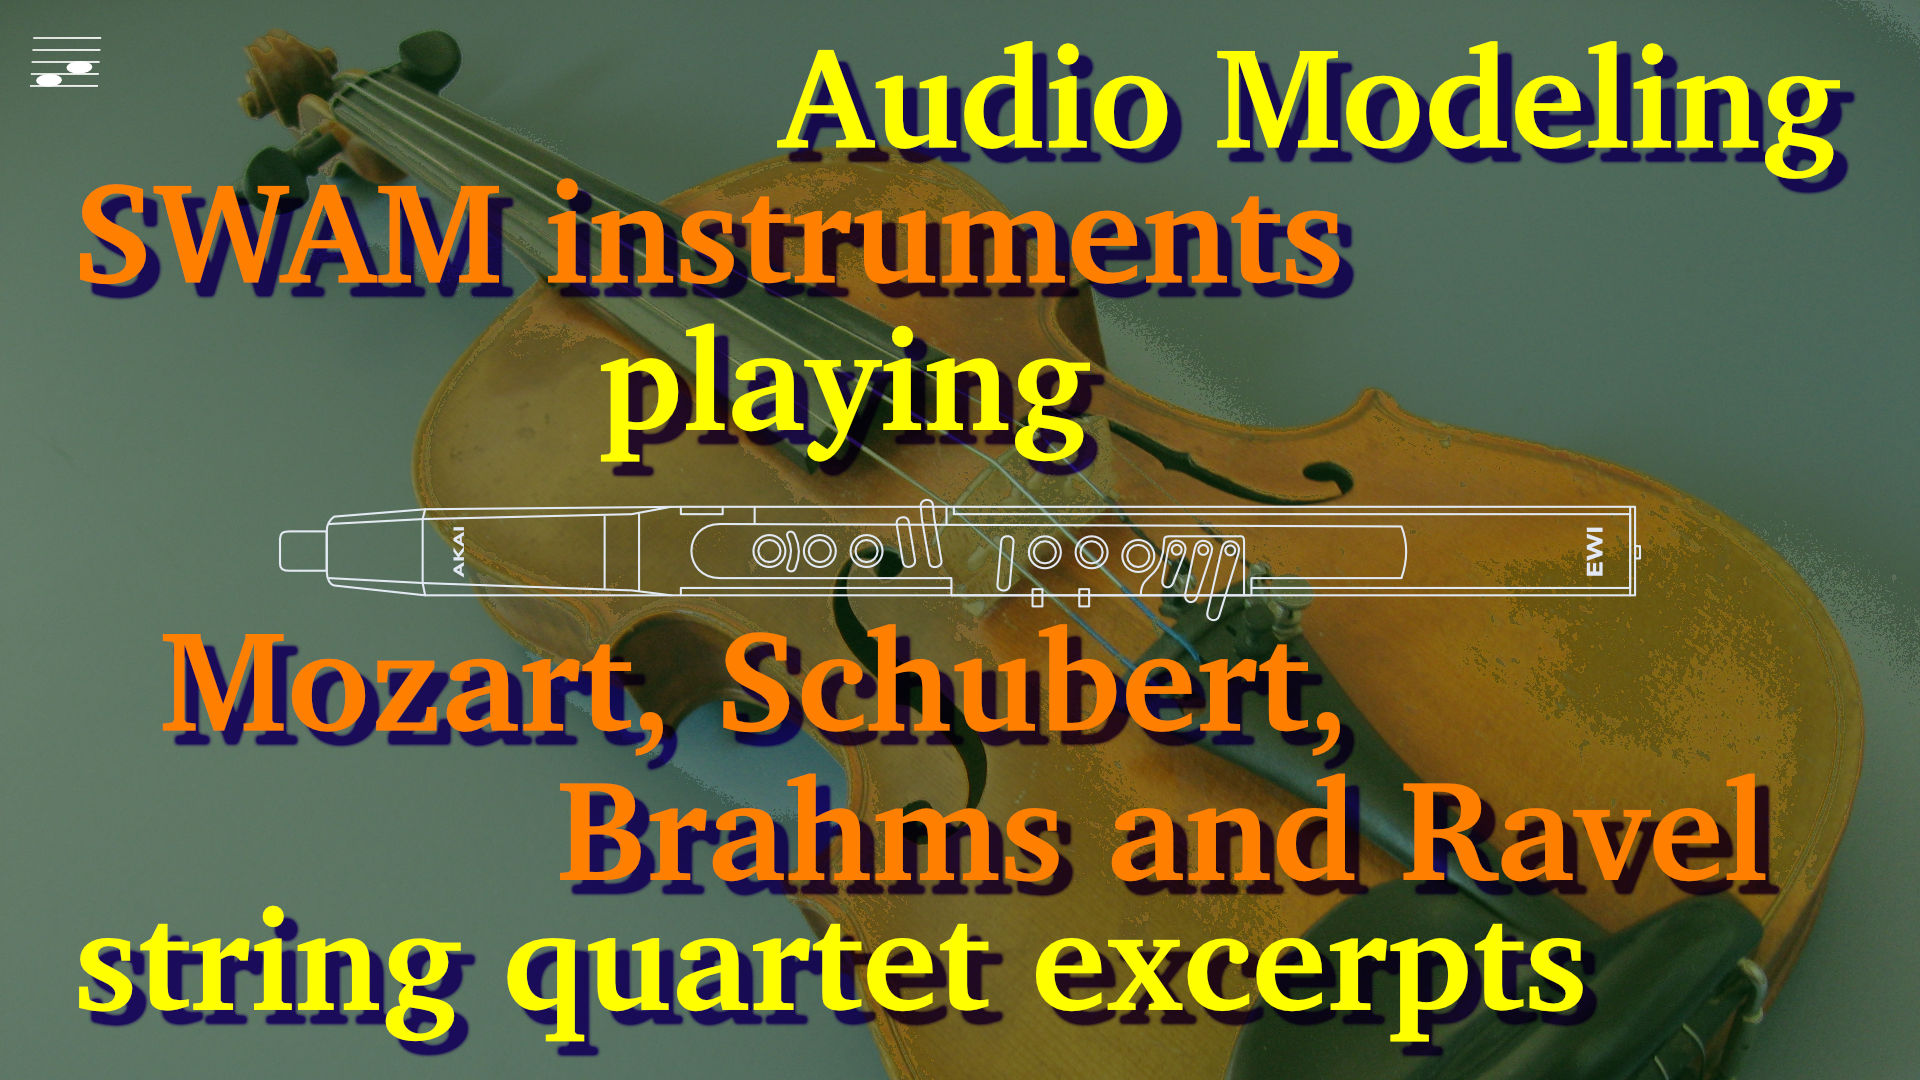 YouTube thumbnail for the SWAM instruments playing Mozart, Schubert, Brahms and Ravel string quartet excerpts video